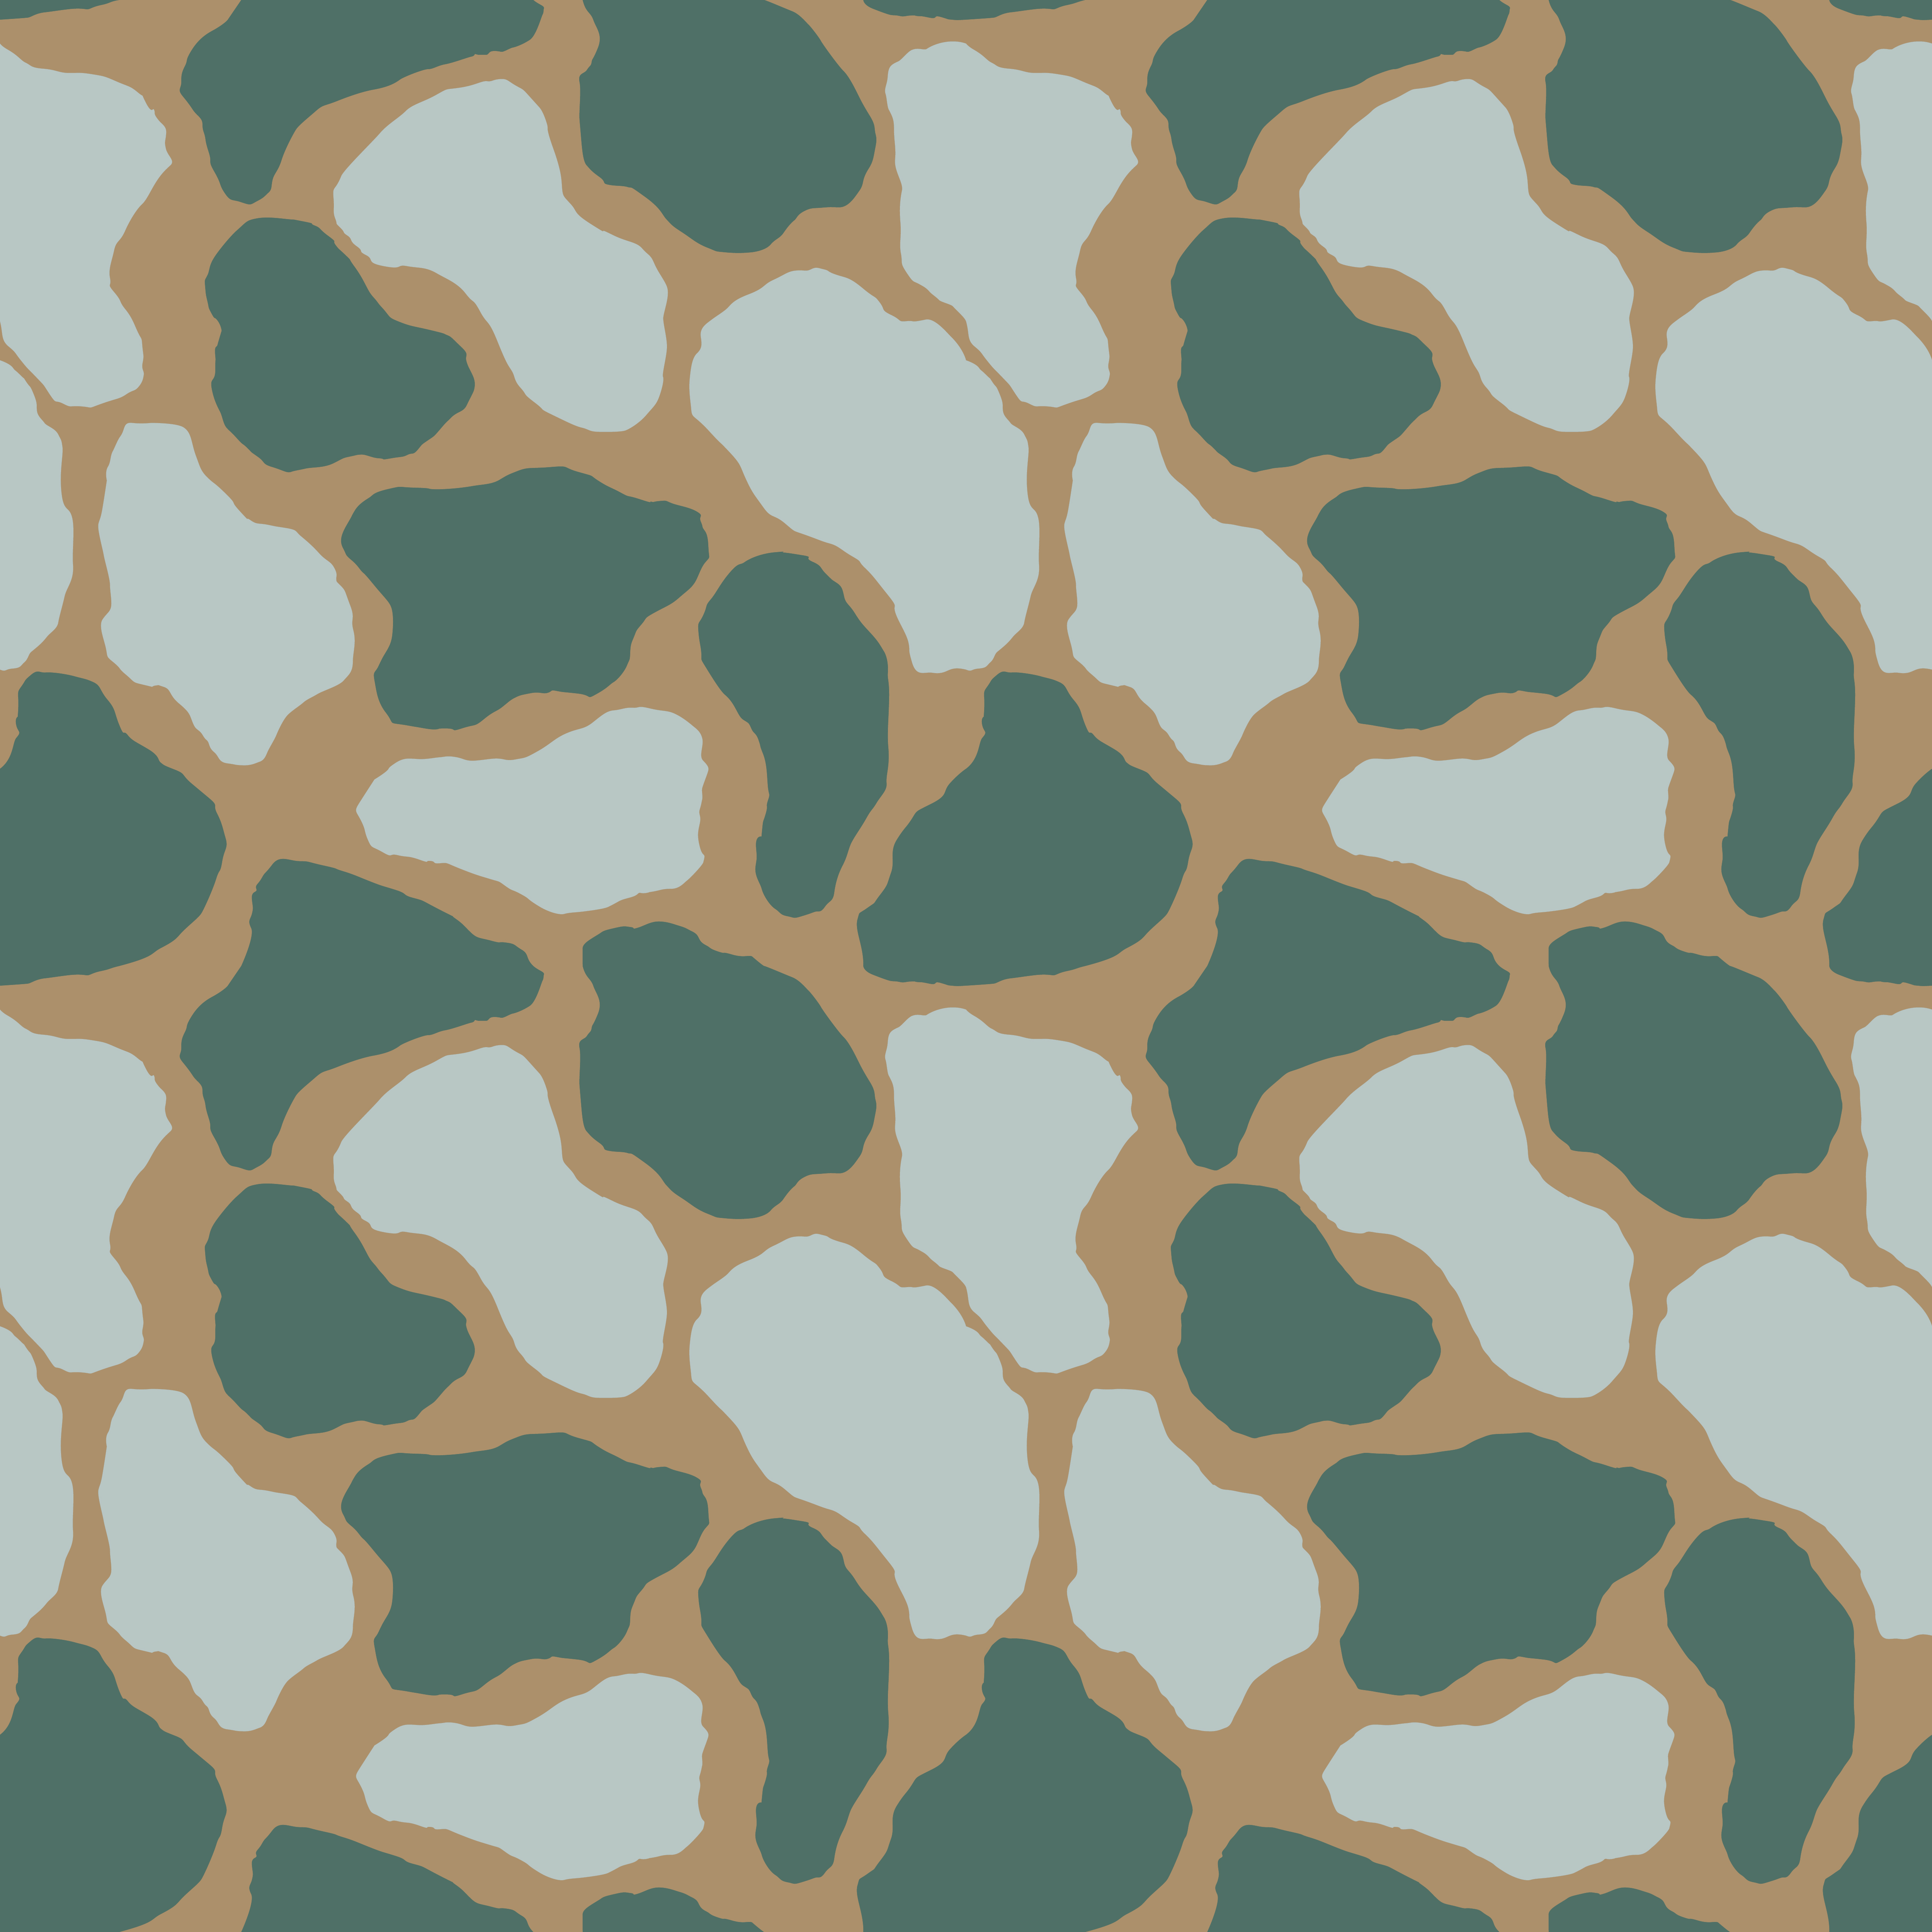 Camouflage pattern. Seamless. Military background. Soldier